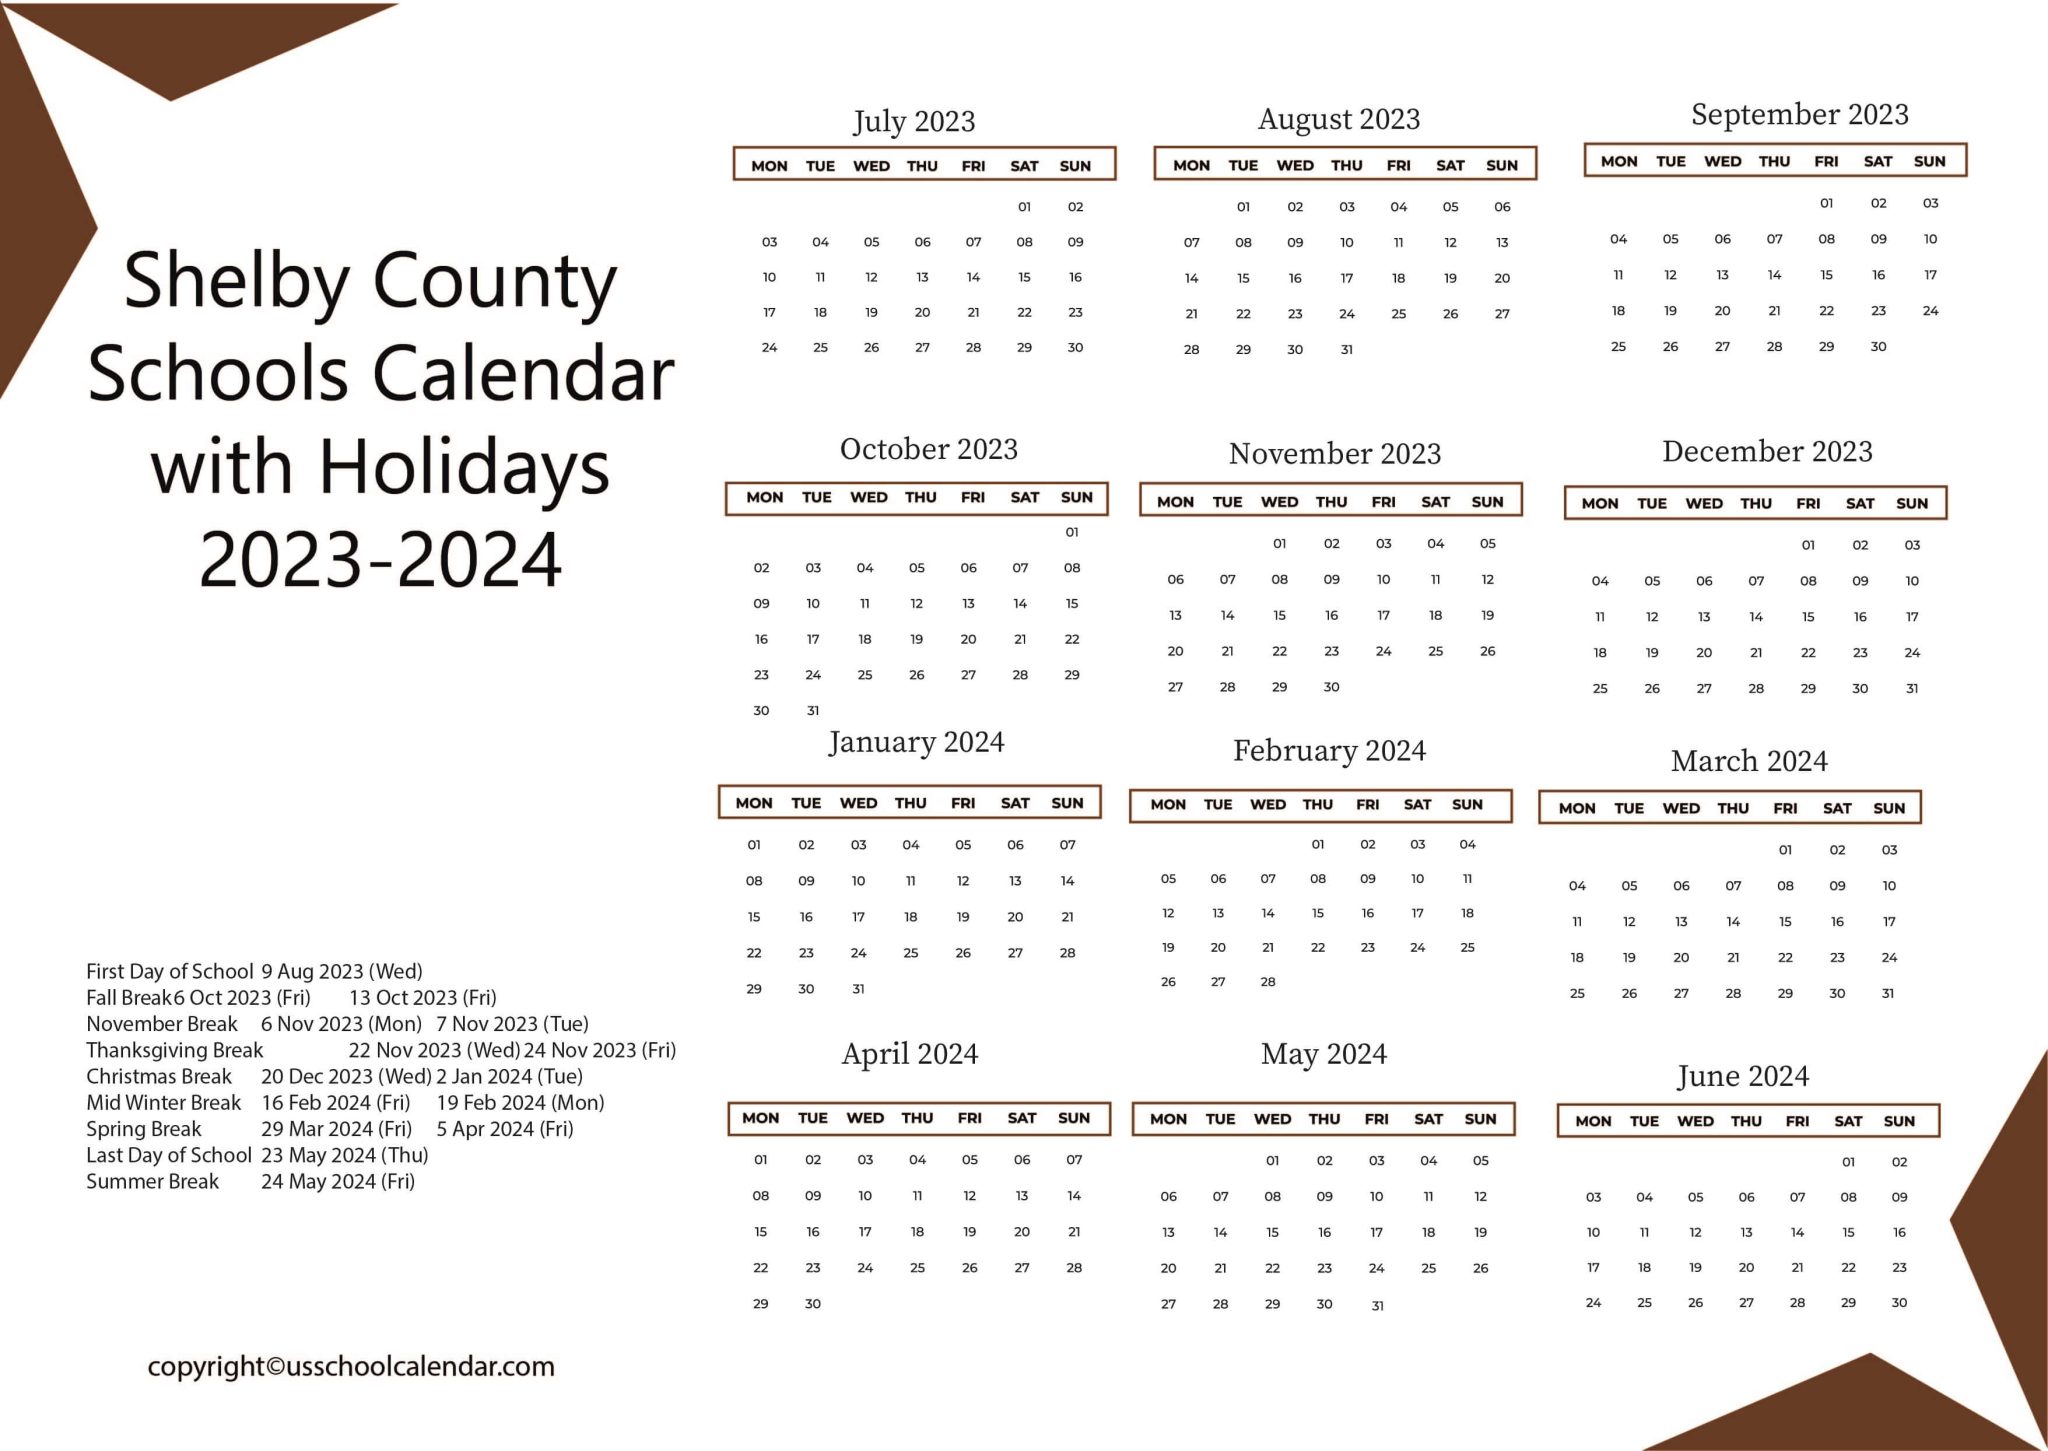 Shelby County Schools Calendar with Holidays 2023 2024